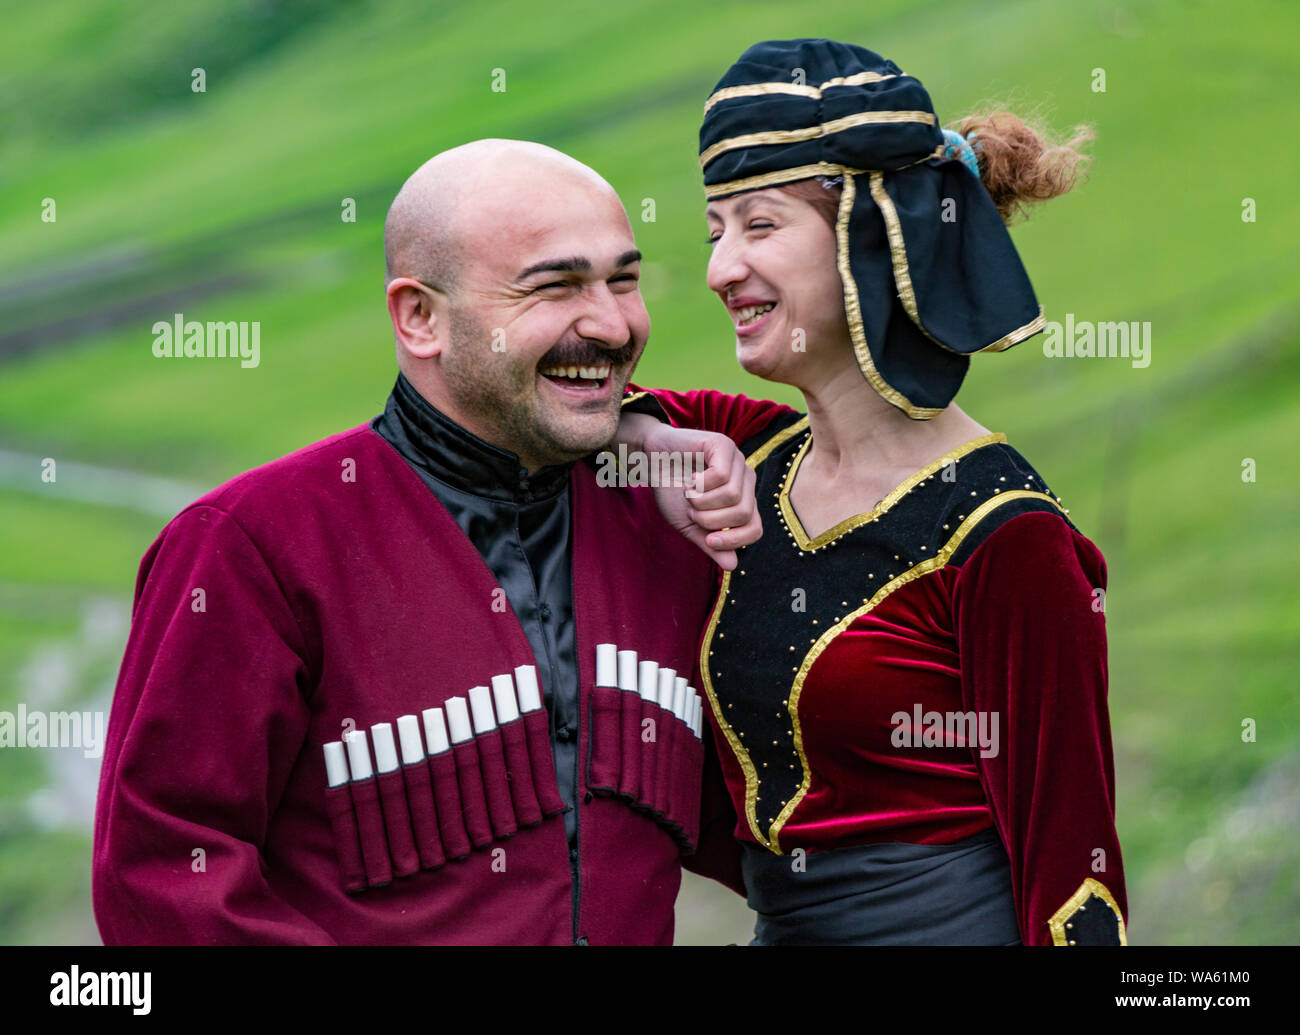 Mestia, Georgia - June 11, 2016 - Man and woman in traditional medieval garb share a laugh together Stock Photo